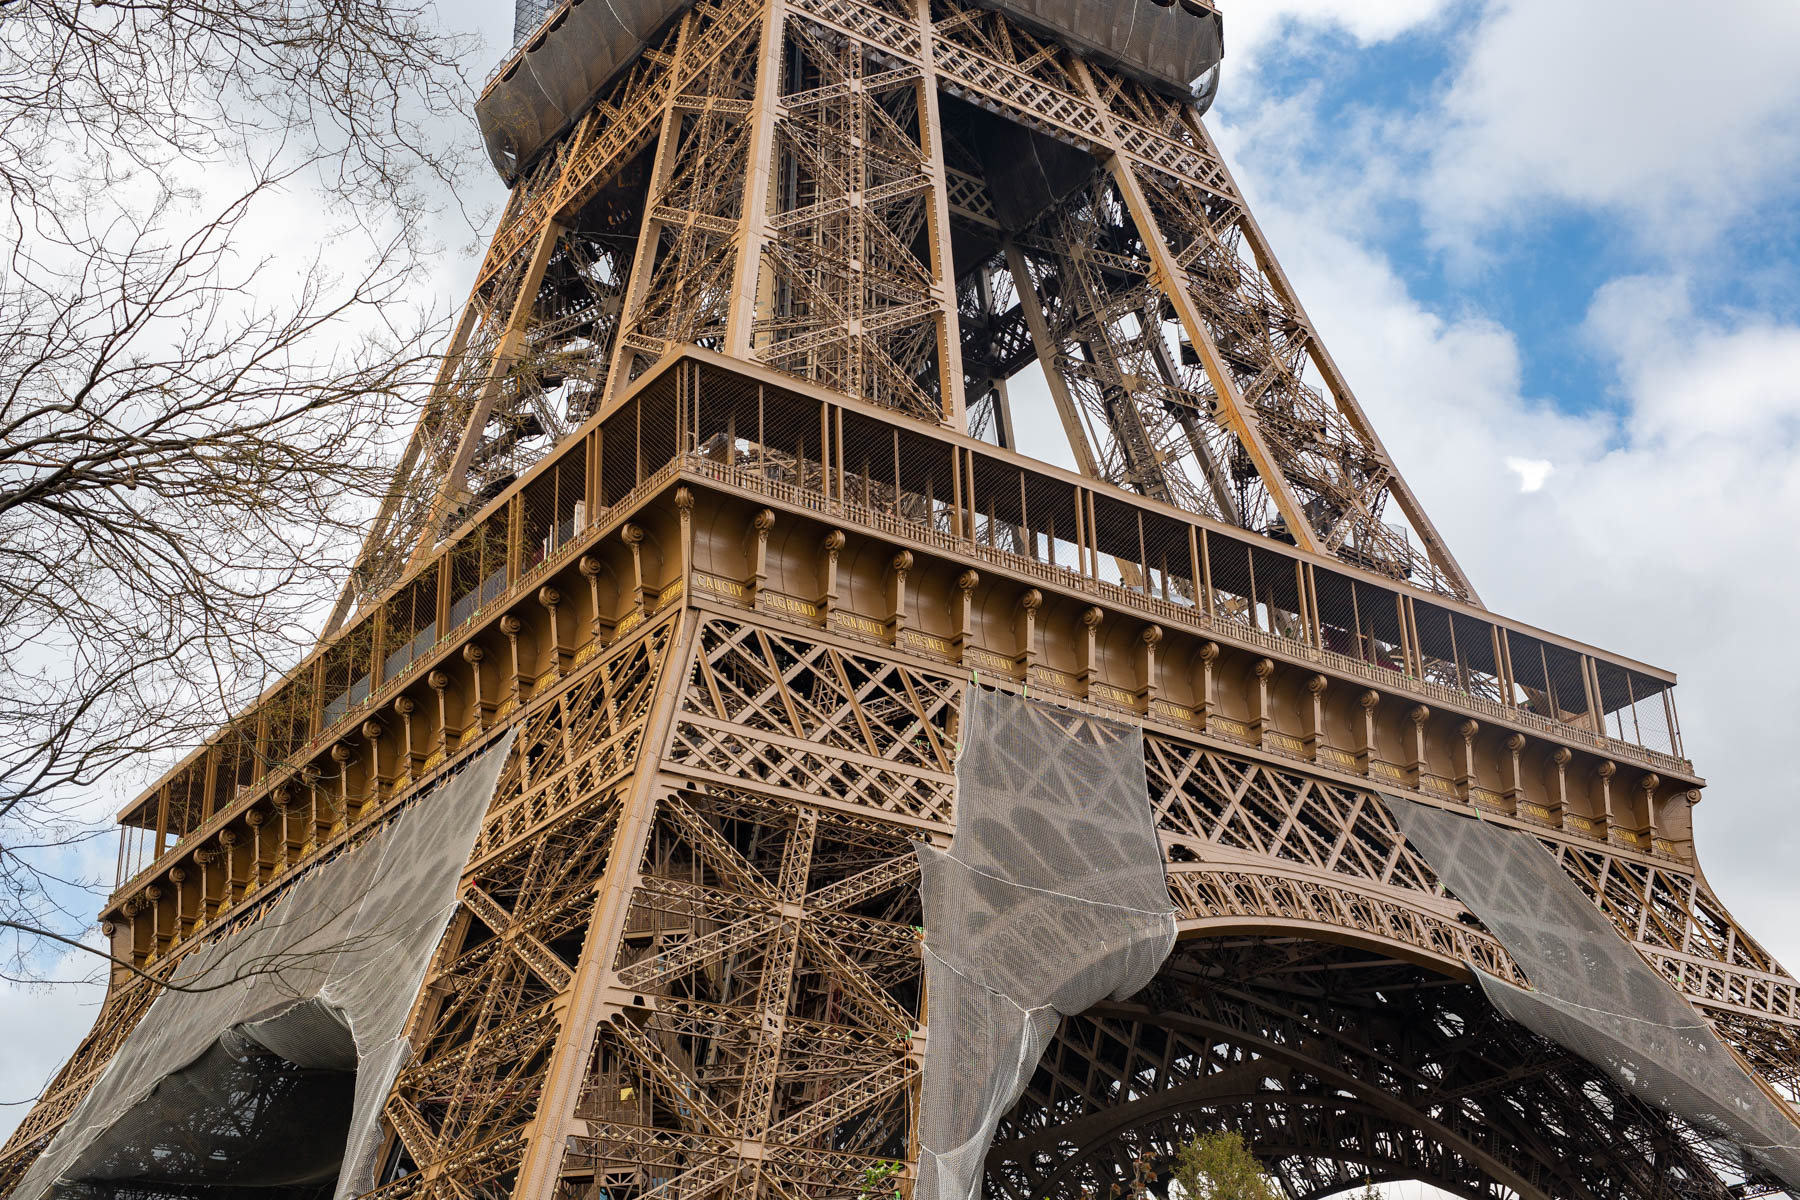 Names on the side of the Eiffel Tower, 50 Facts